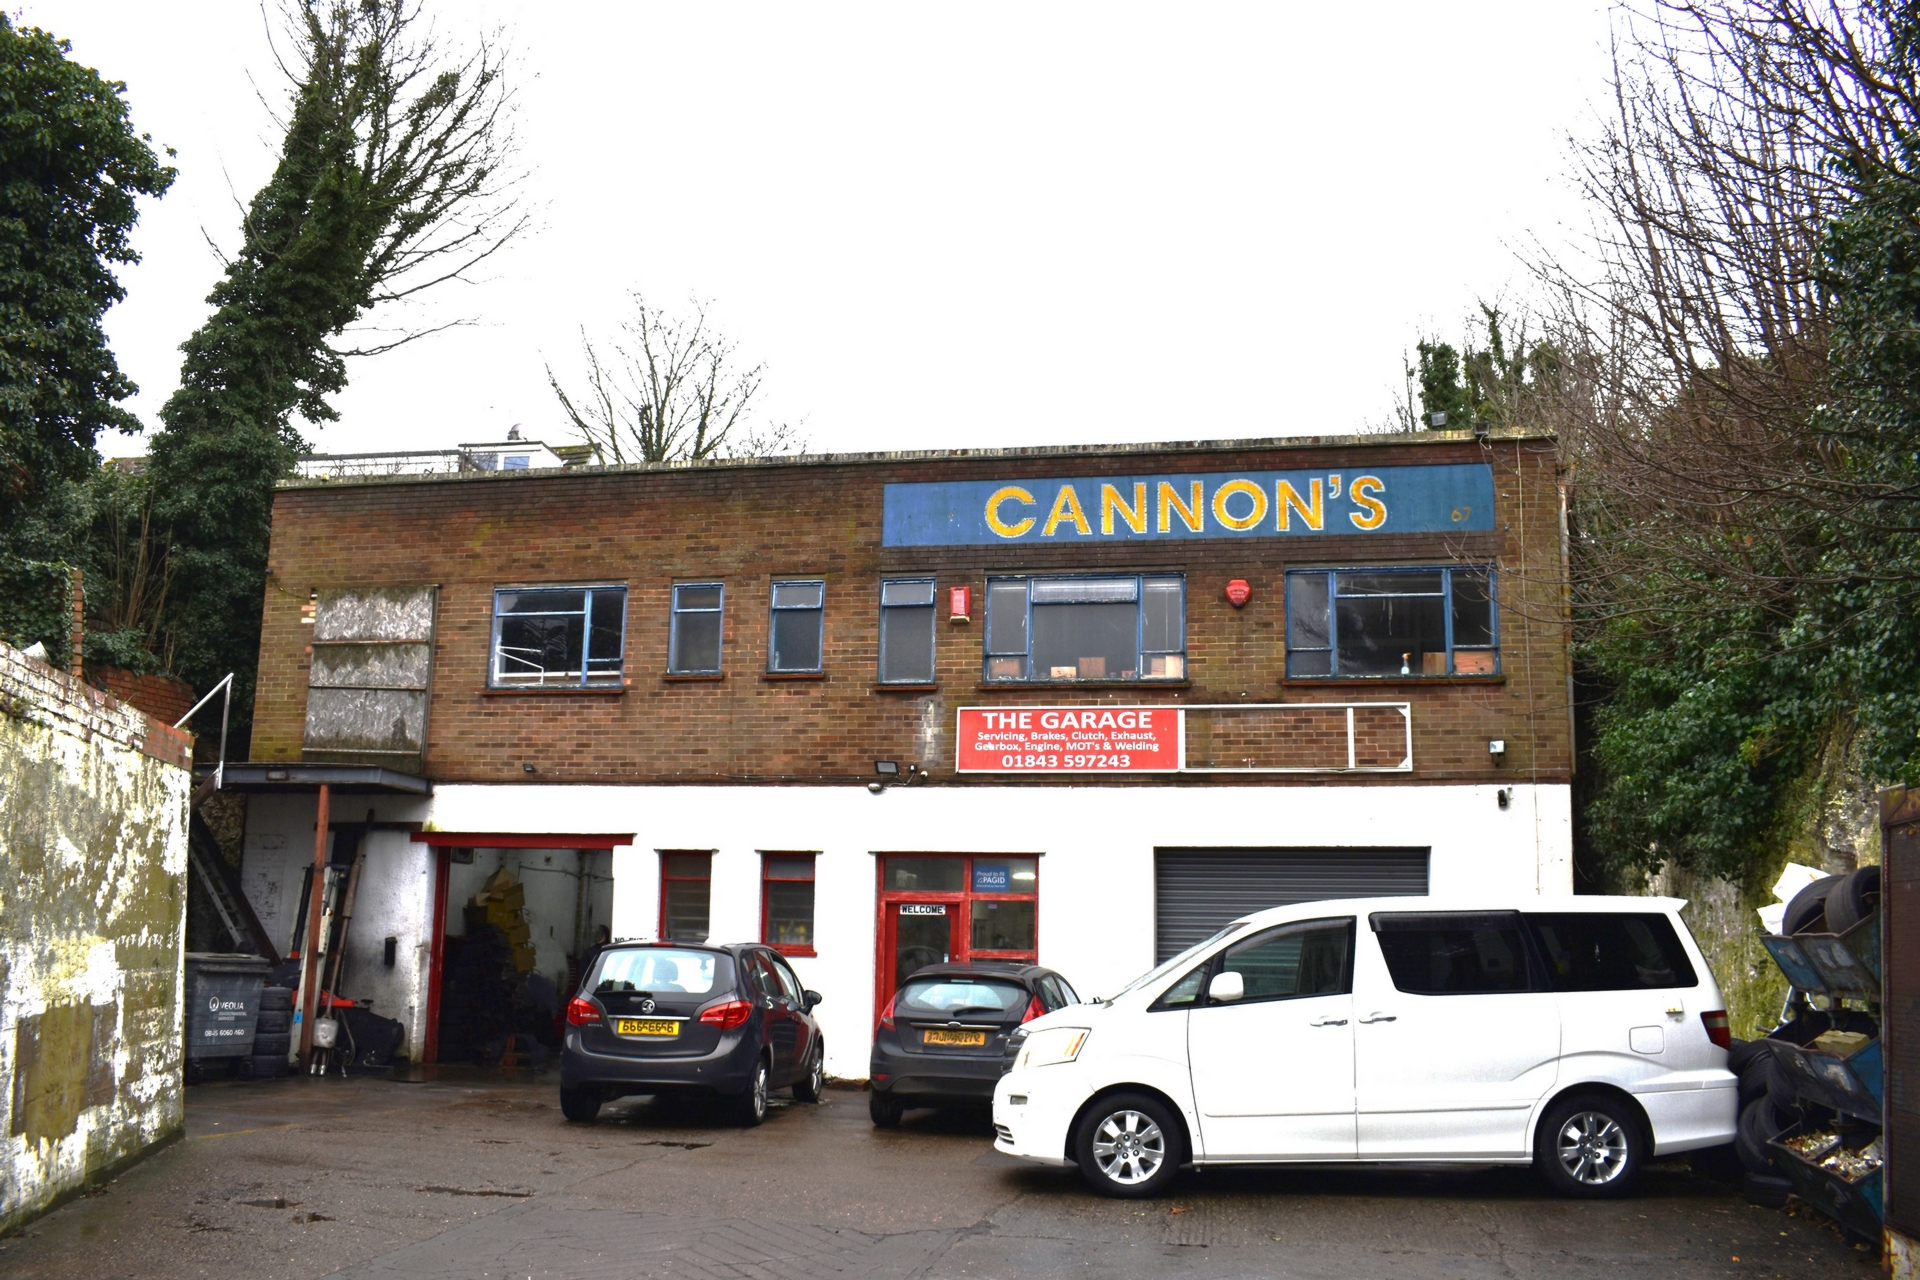 Investment or Owner Occupation  Detached working vehicle workshop premises situated in an established location on the outskirts of Ramsgate believed to fall into the use class E of the UCO 2020.